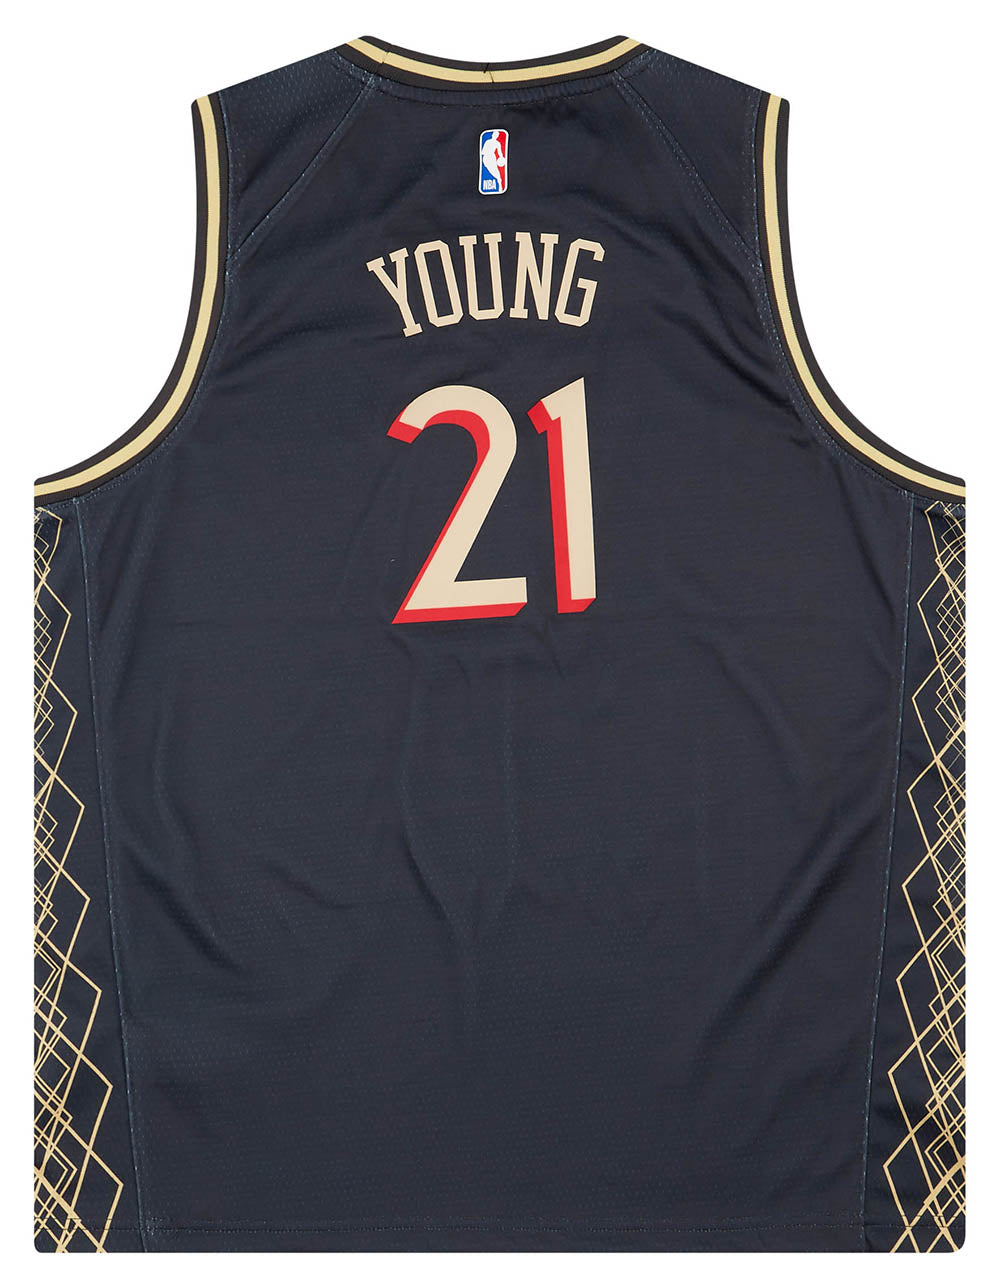 2020-21 CHICAGO BULLS YOUNG #21 NIKE SWINGMAN JERSEY (ALTERNATE) Y - W/TAGS